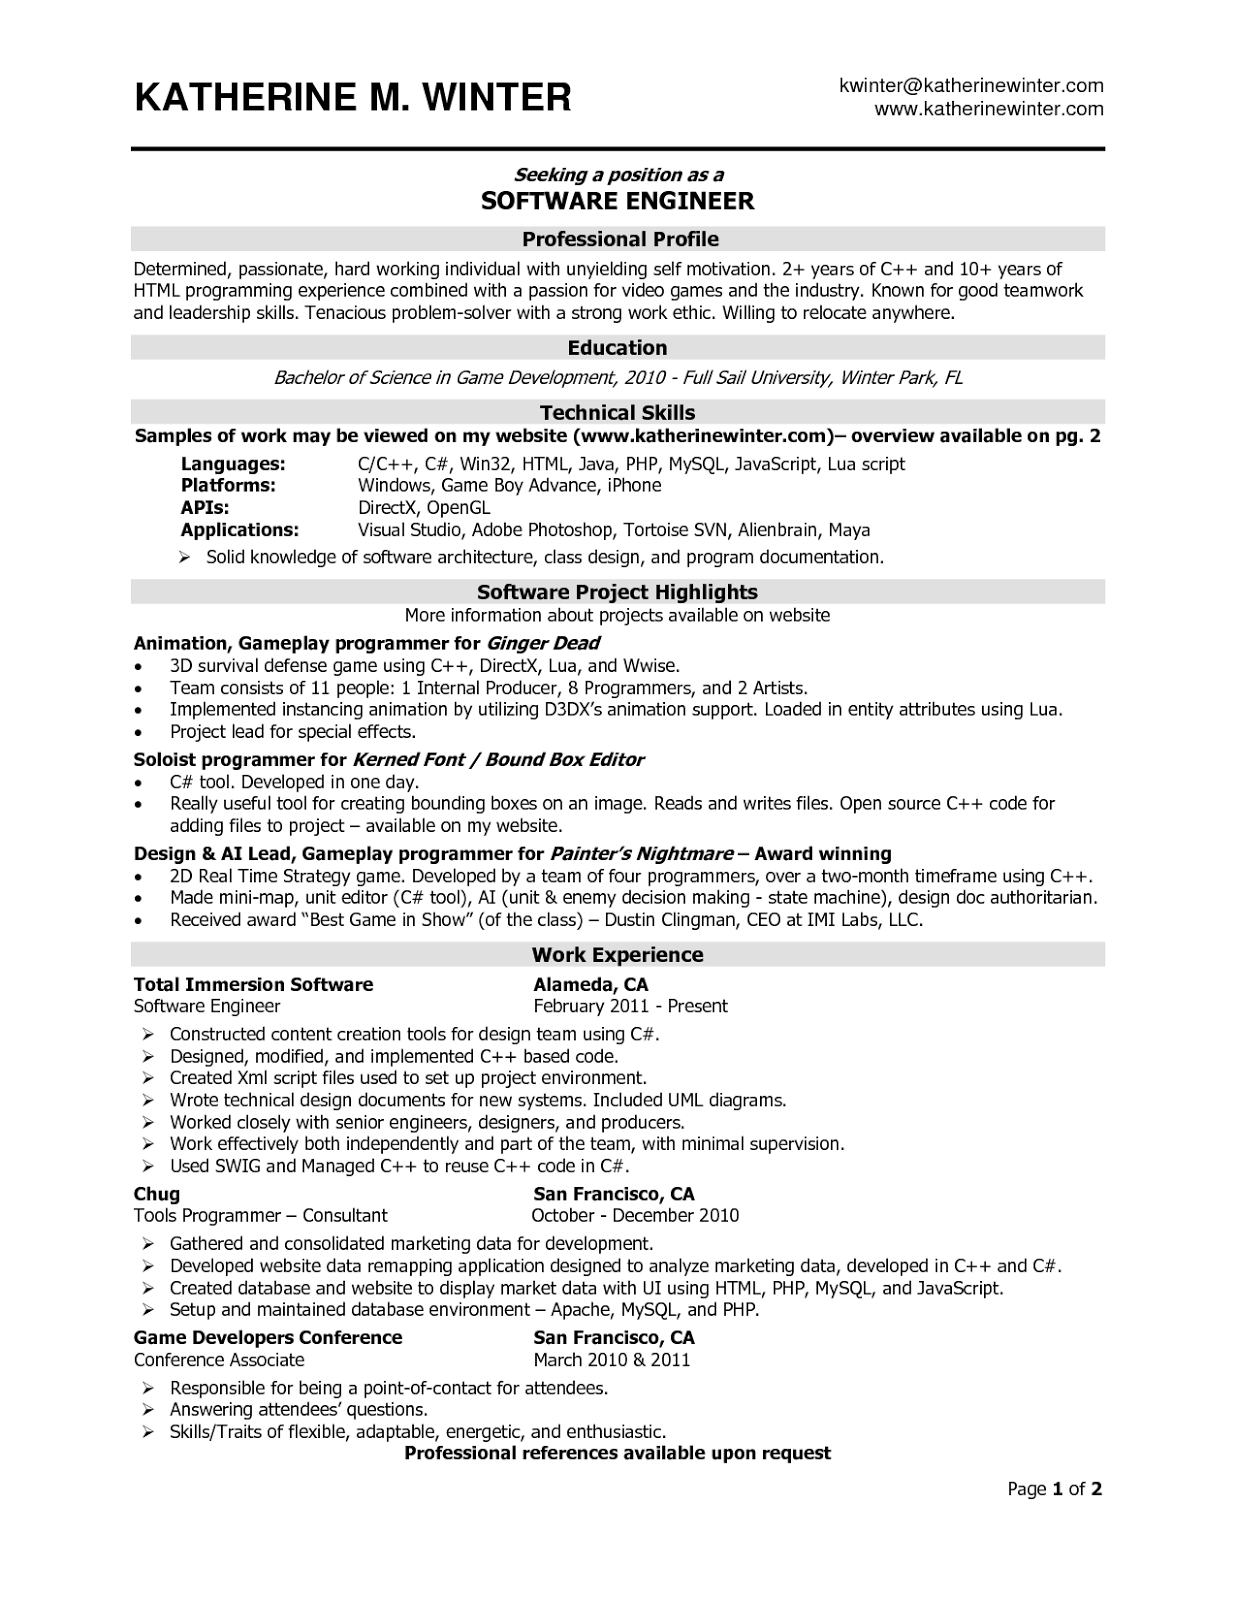 resume samples for experienced software professionals april